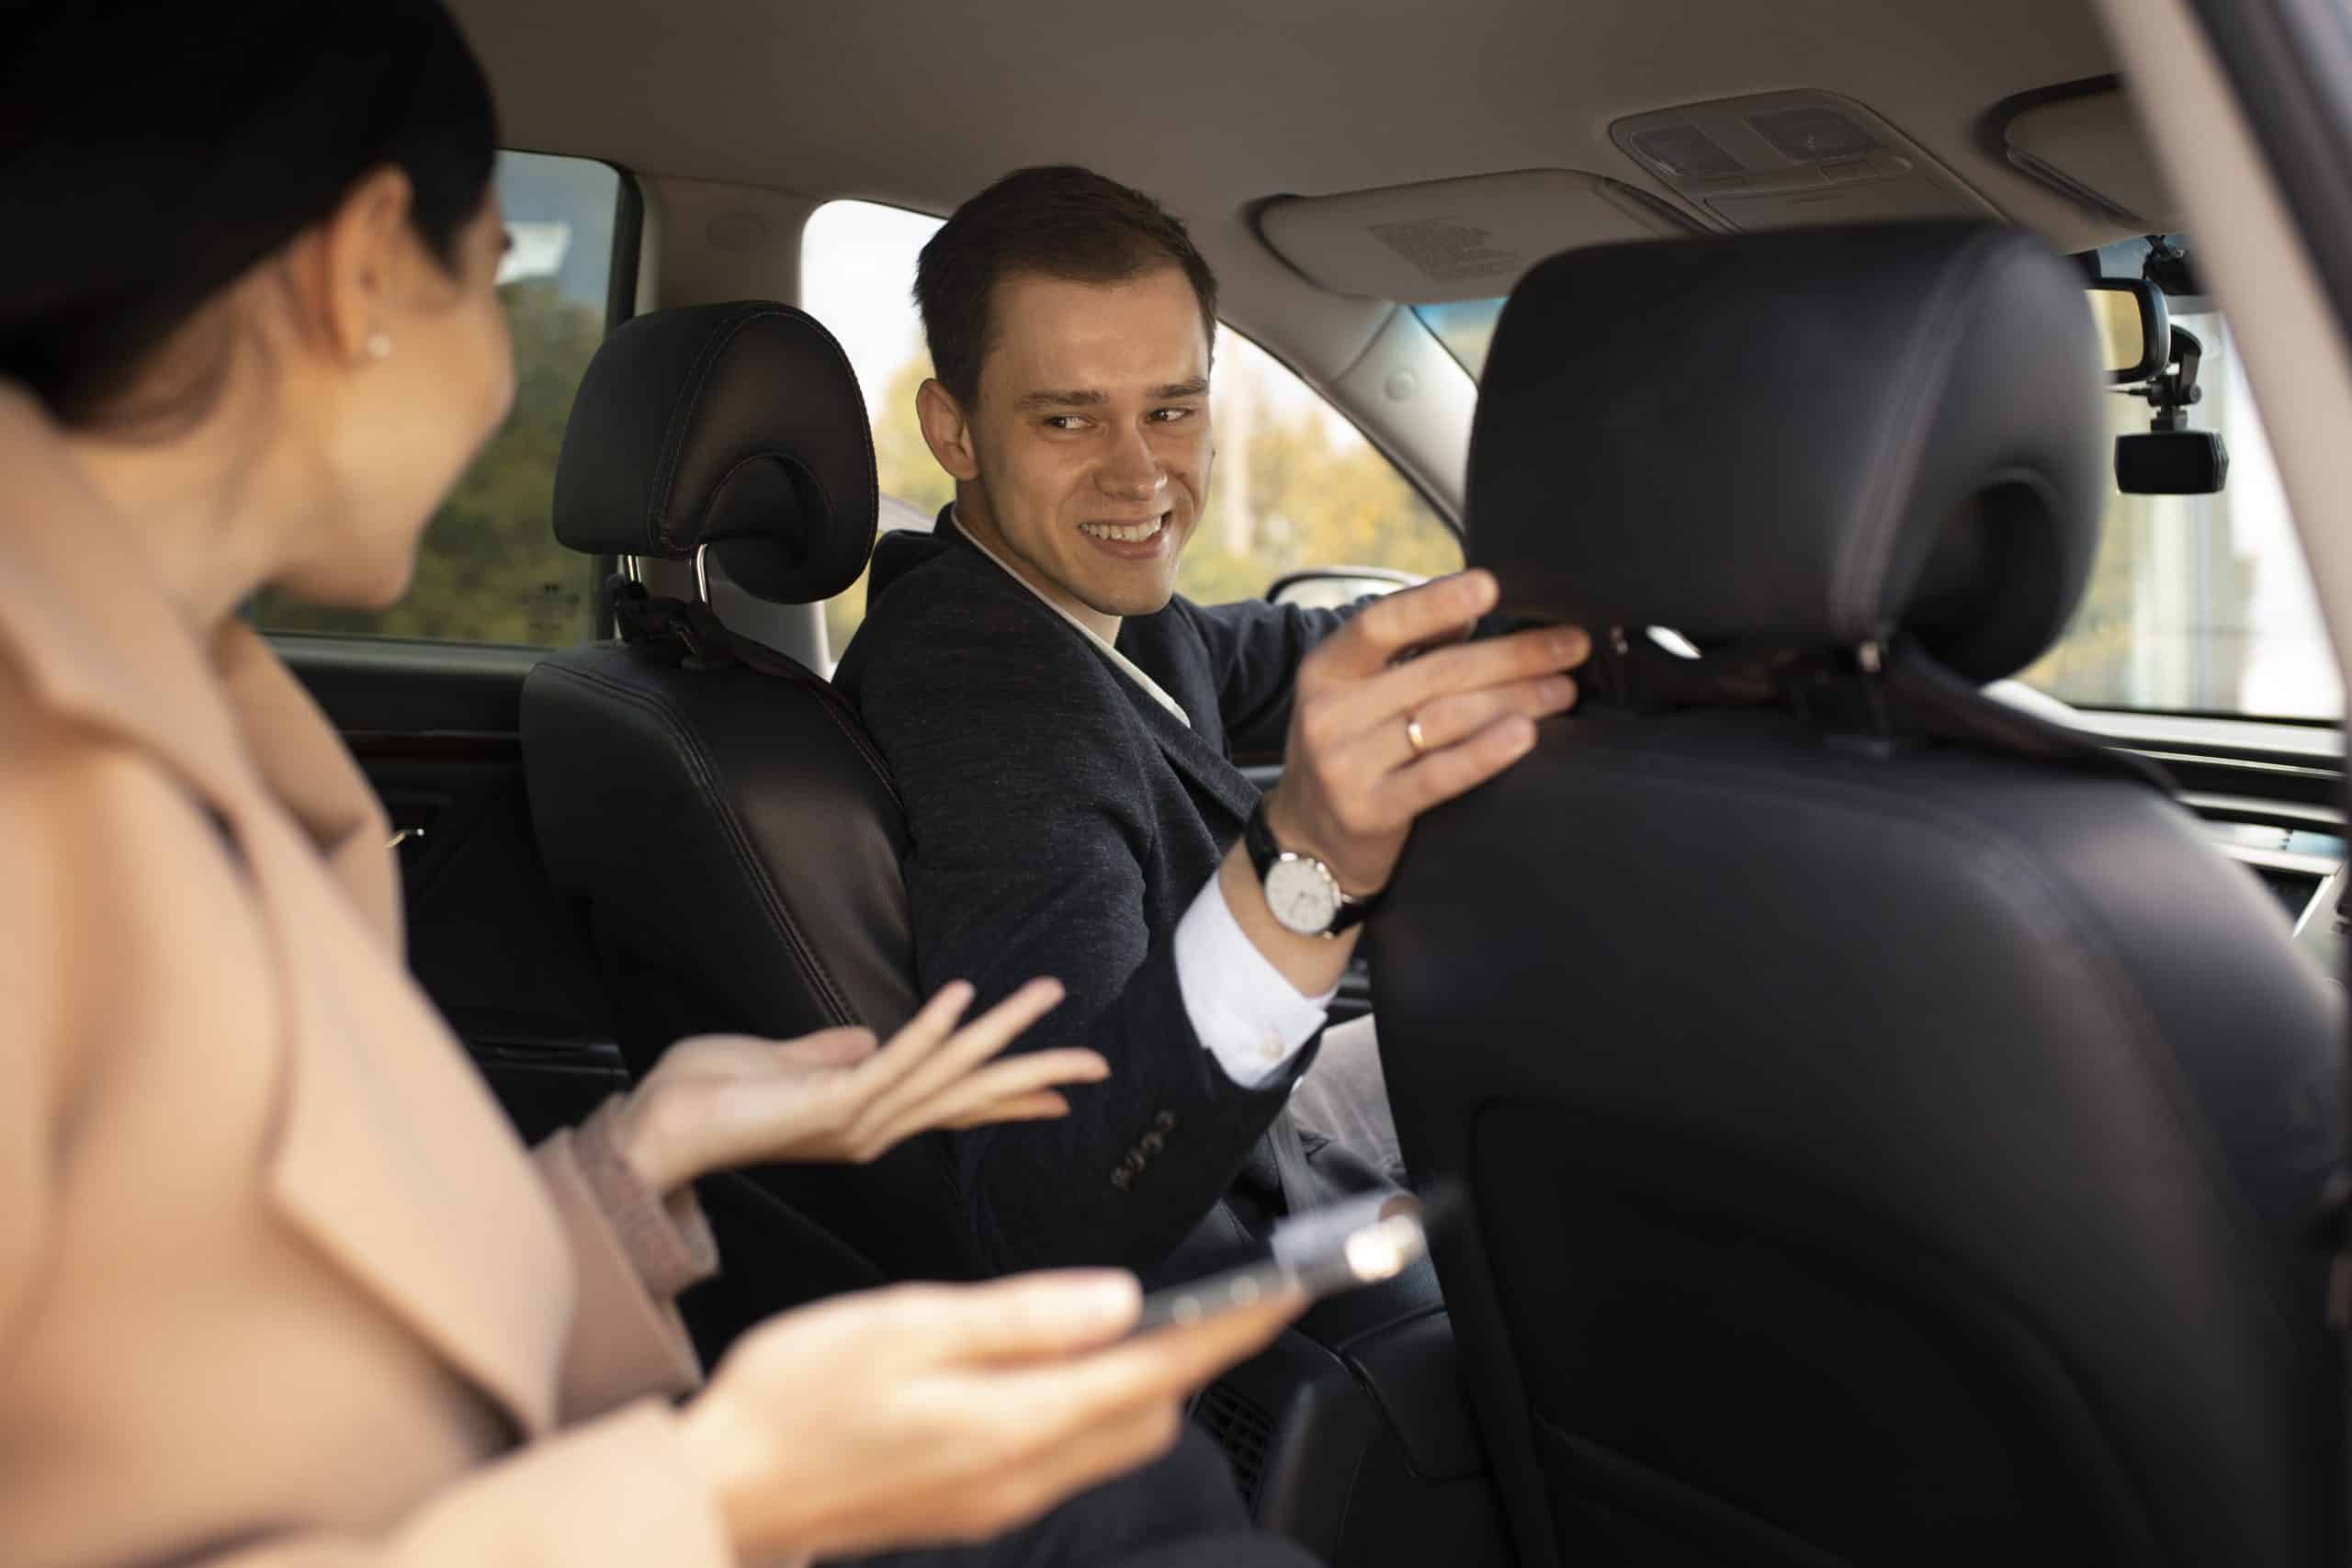 Ride-Sharing Safety: Essential Tips and Legal Insights for Passengers